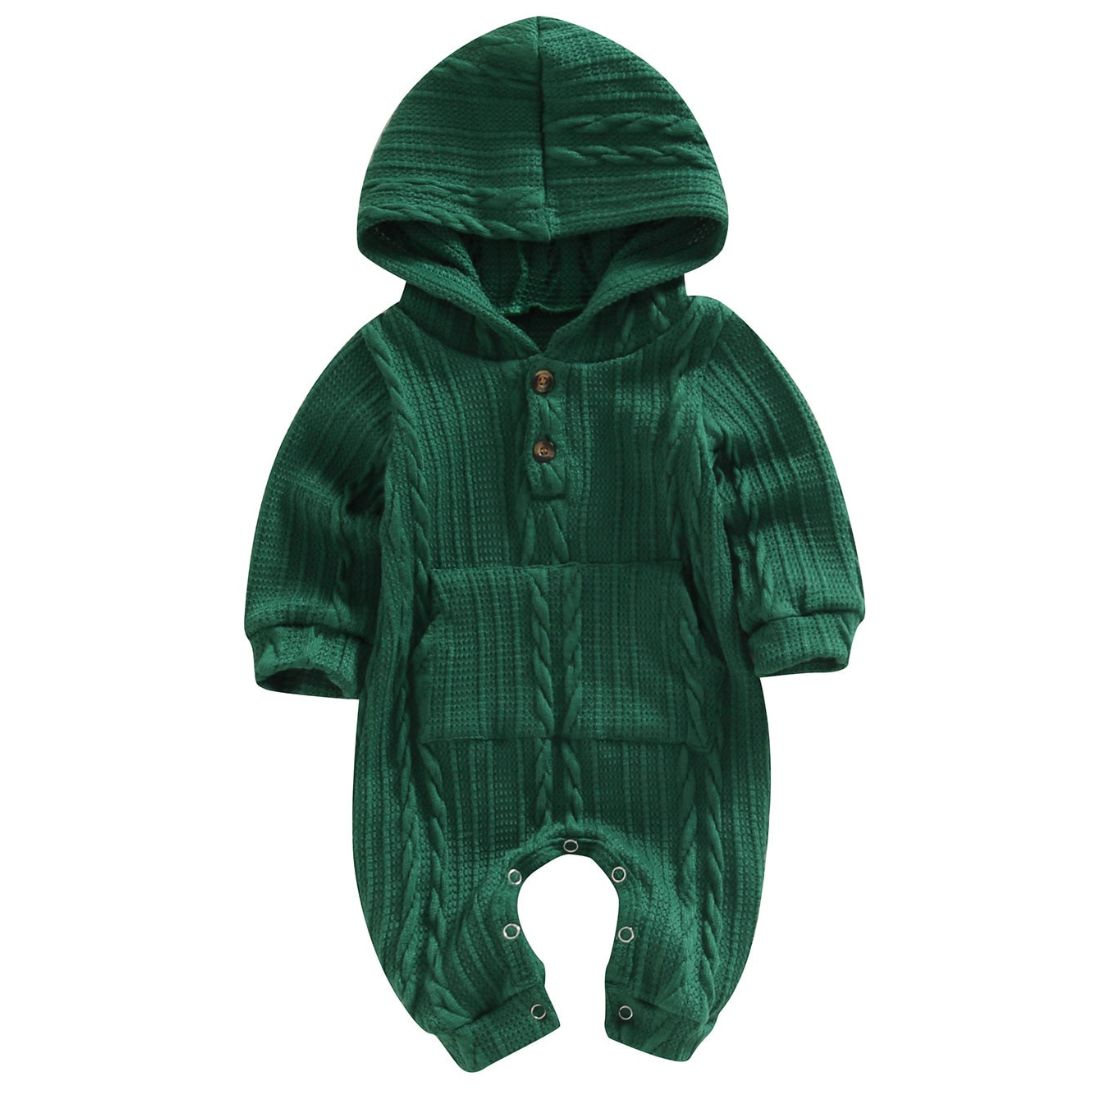 Buy Trendy and Afforable Baby Rompers @ My Trendy Youngsters - Dress your Mini in Style @ My Trendy Youngsters Unisex Long Sleeve Solid Hooded Textured Romper - My Trendy Youngsters | Buy Trendy and Afforable Baby Rompers @ My Trendy Youngsters - Dress your Mini in Style @ My Trendy Youngsters 